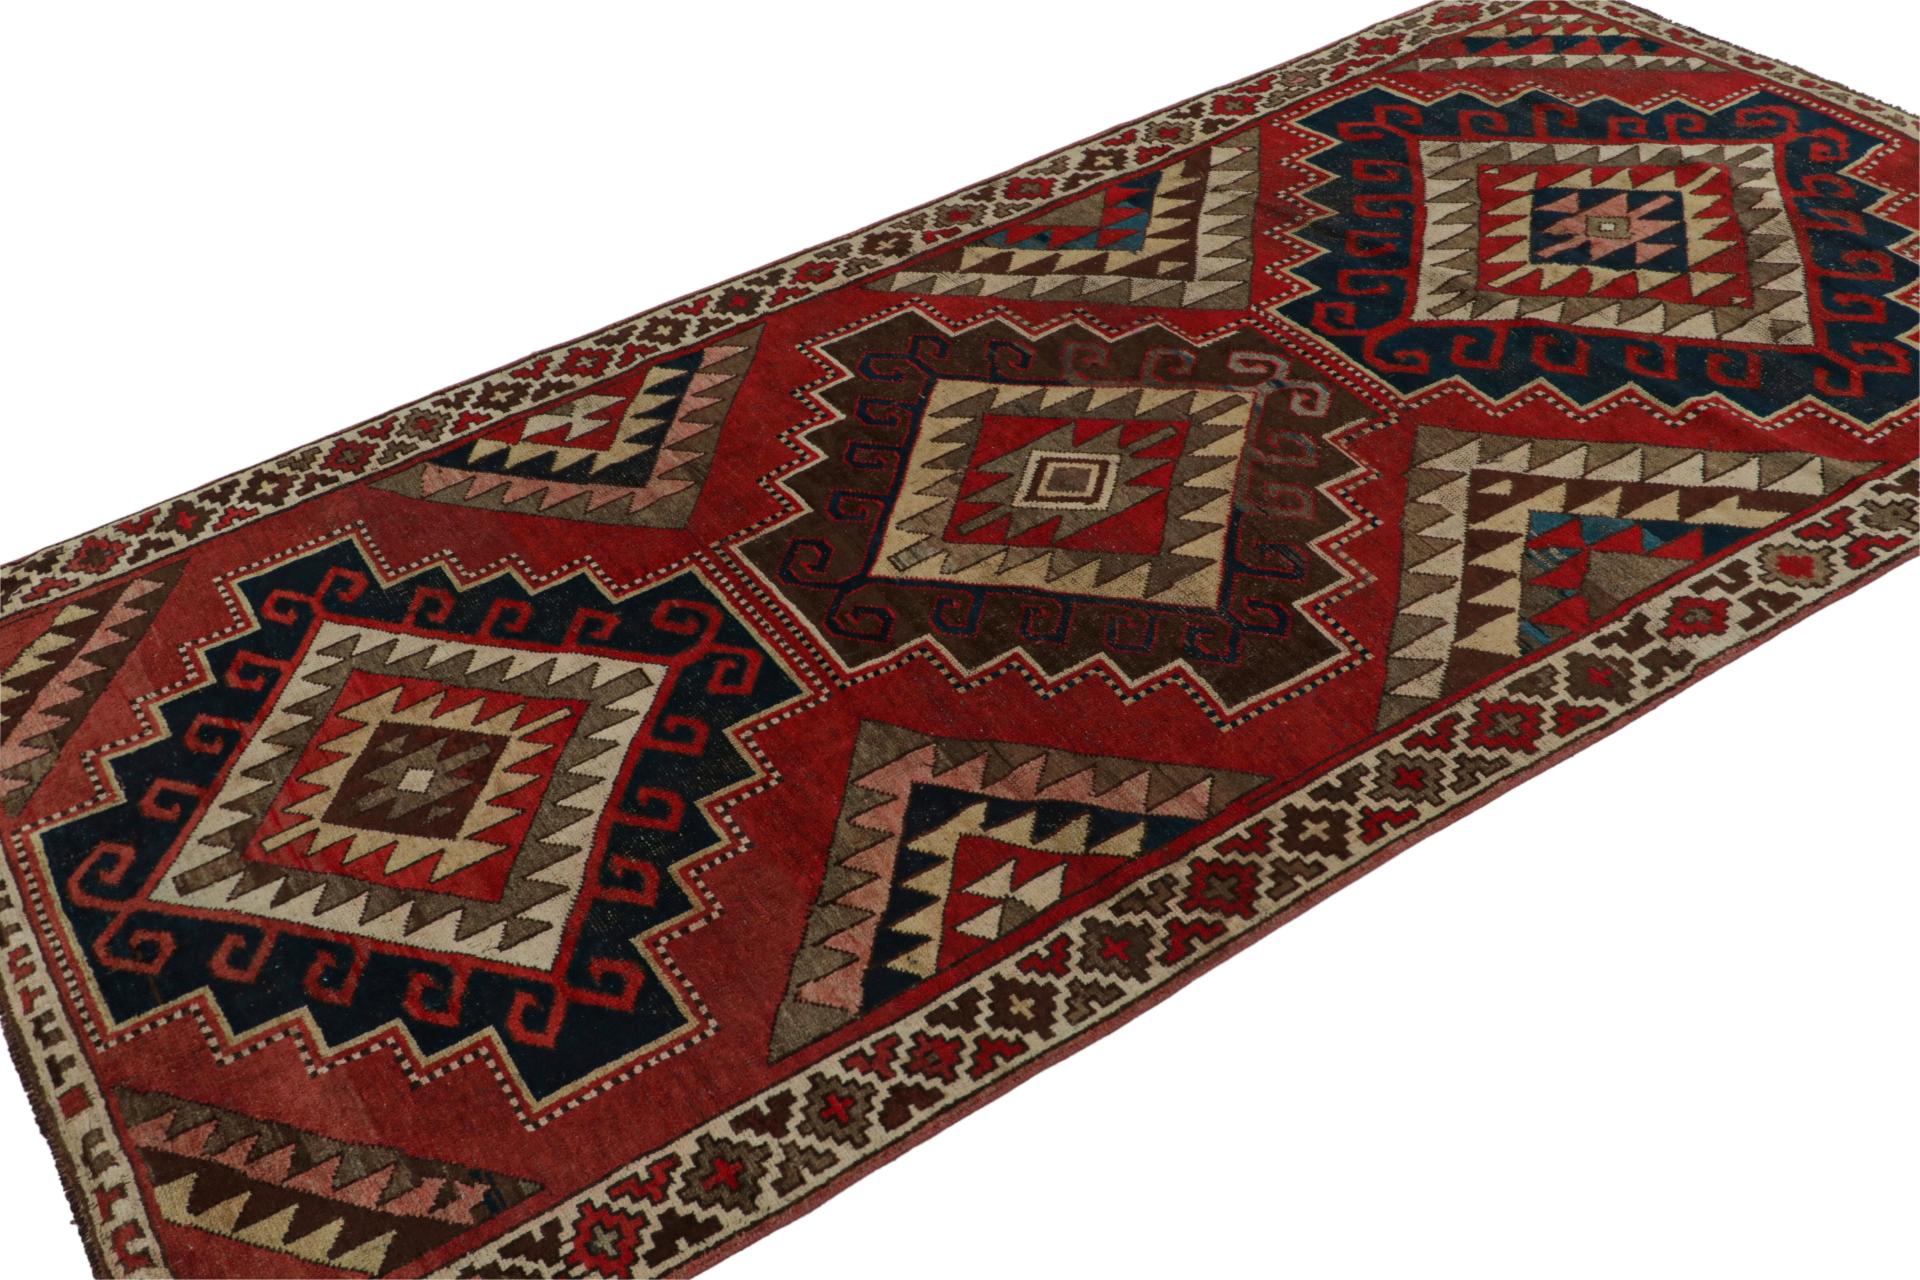 Hand knotted in wool circa 1970s, this vintage 5x8 Turkish rug, features traditional designs with an inspiration from Azerbaijani tribal rugs and similar provenances 

On the Design: 

This design features traditional design with an inspiration from